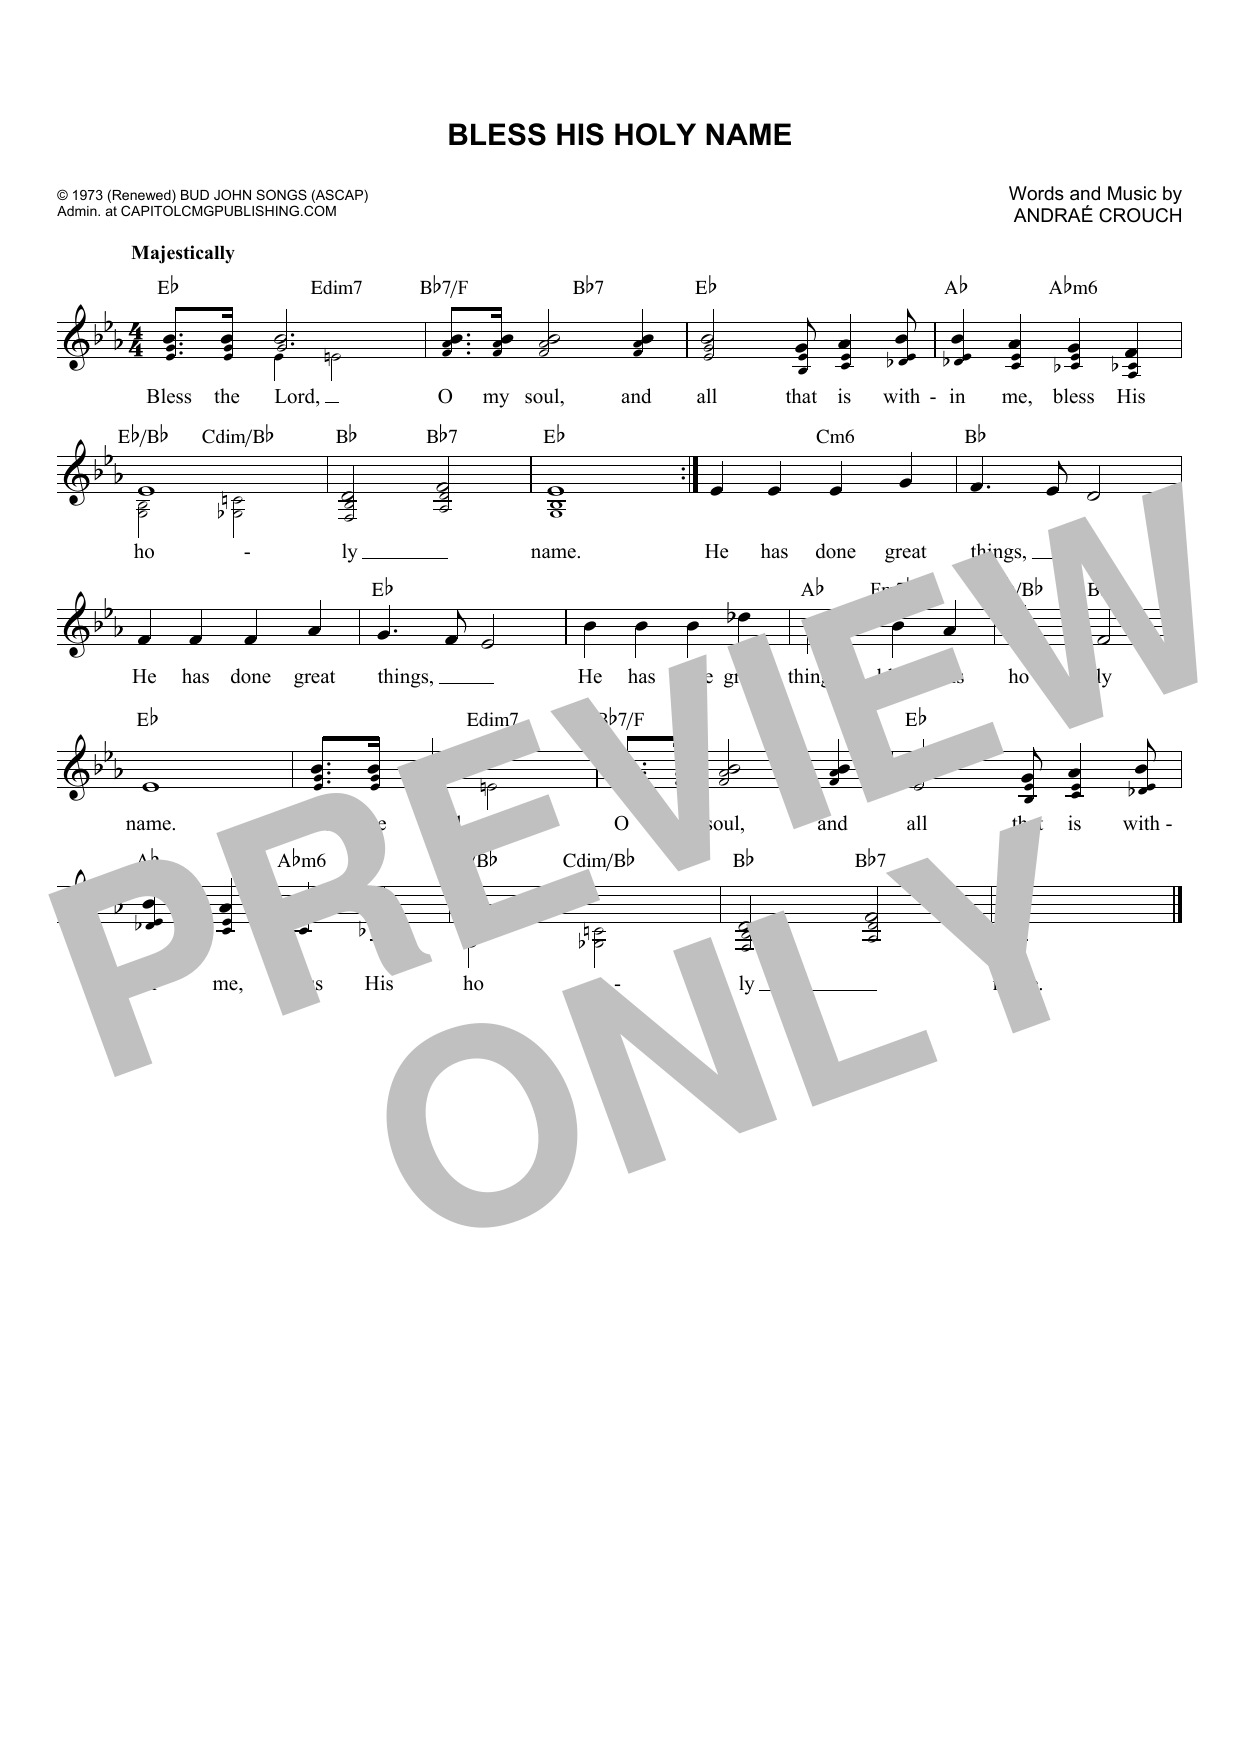 Download Andrae Crouch Bless His Holy Name Sheet Music